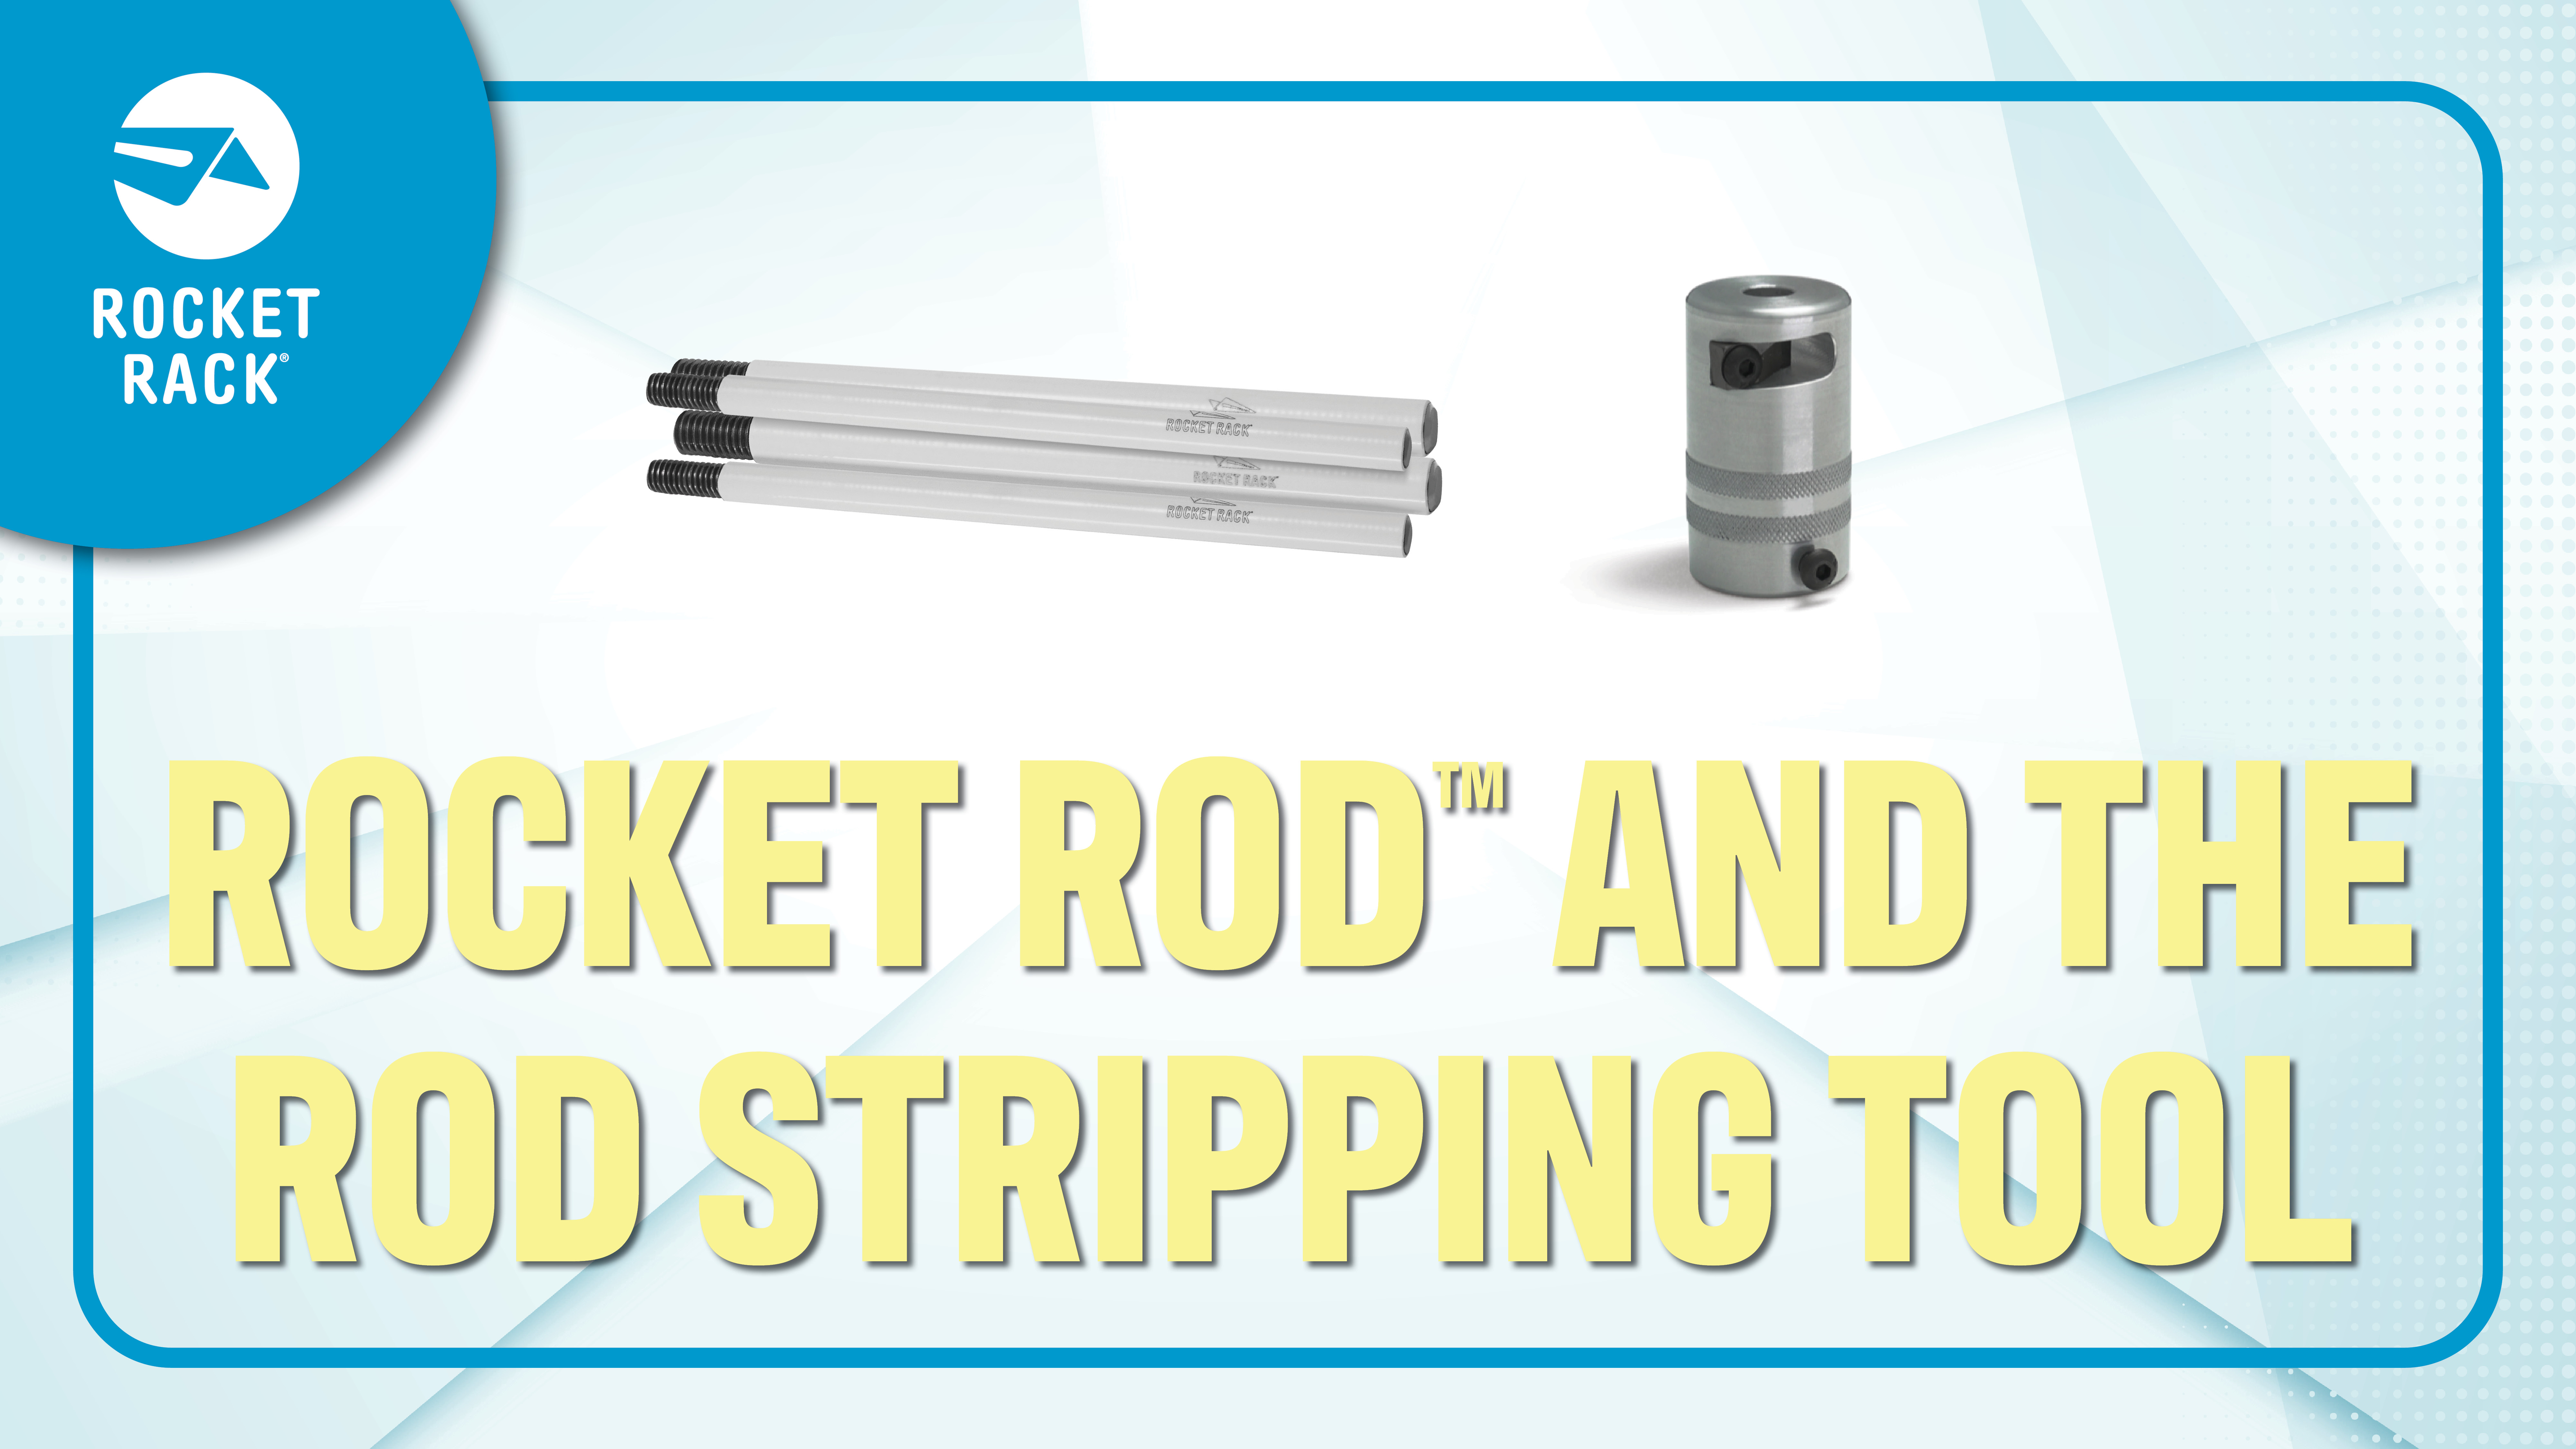 Rocket Rod and Rod Stripping Tool